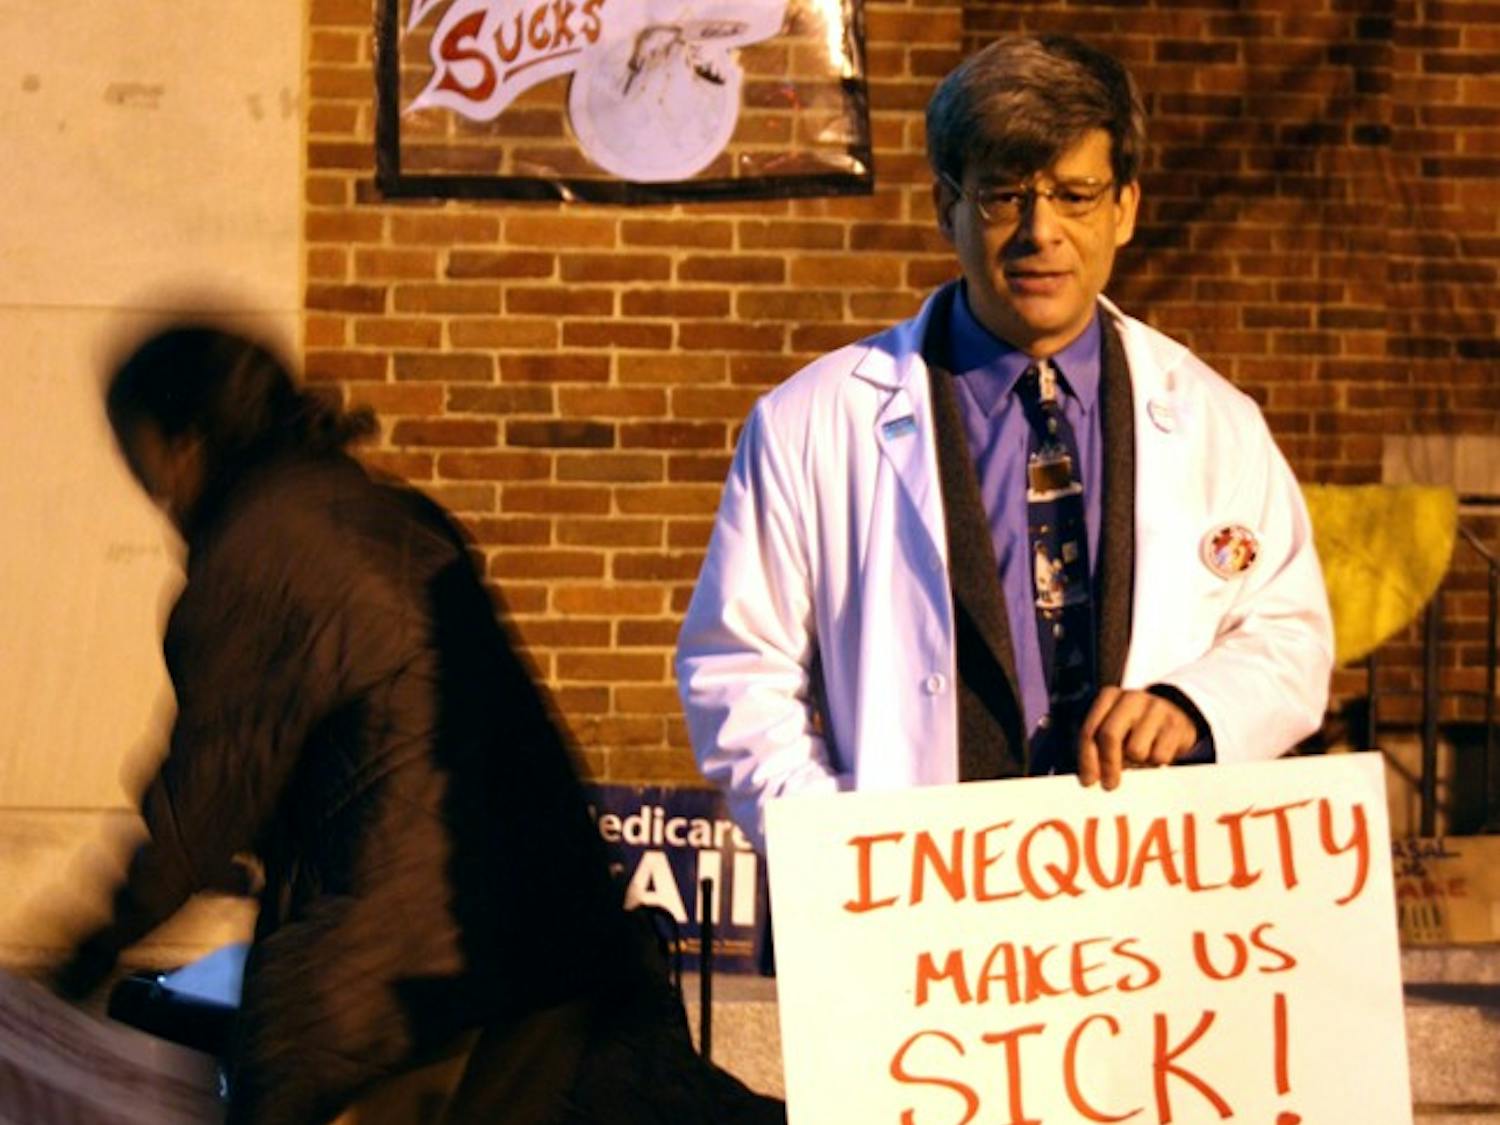 Dr. Steve Auerbach spoke on saturday about "Winning Health Care for the 99%" in front of the post office for Occupy Chapel Hill.Auerbach- white lab coat. Dr. Jonathan Kotch- hat and mustache- professor at UNC, president of Health Care for all NC. Katya Roytburd- holding sign saying "single payer"- helped organize the event with Kotch